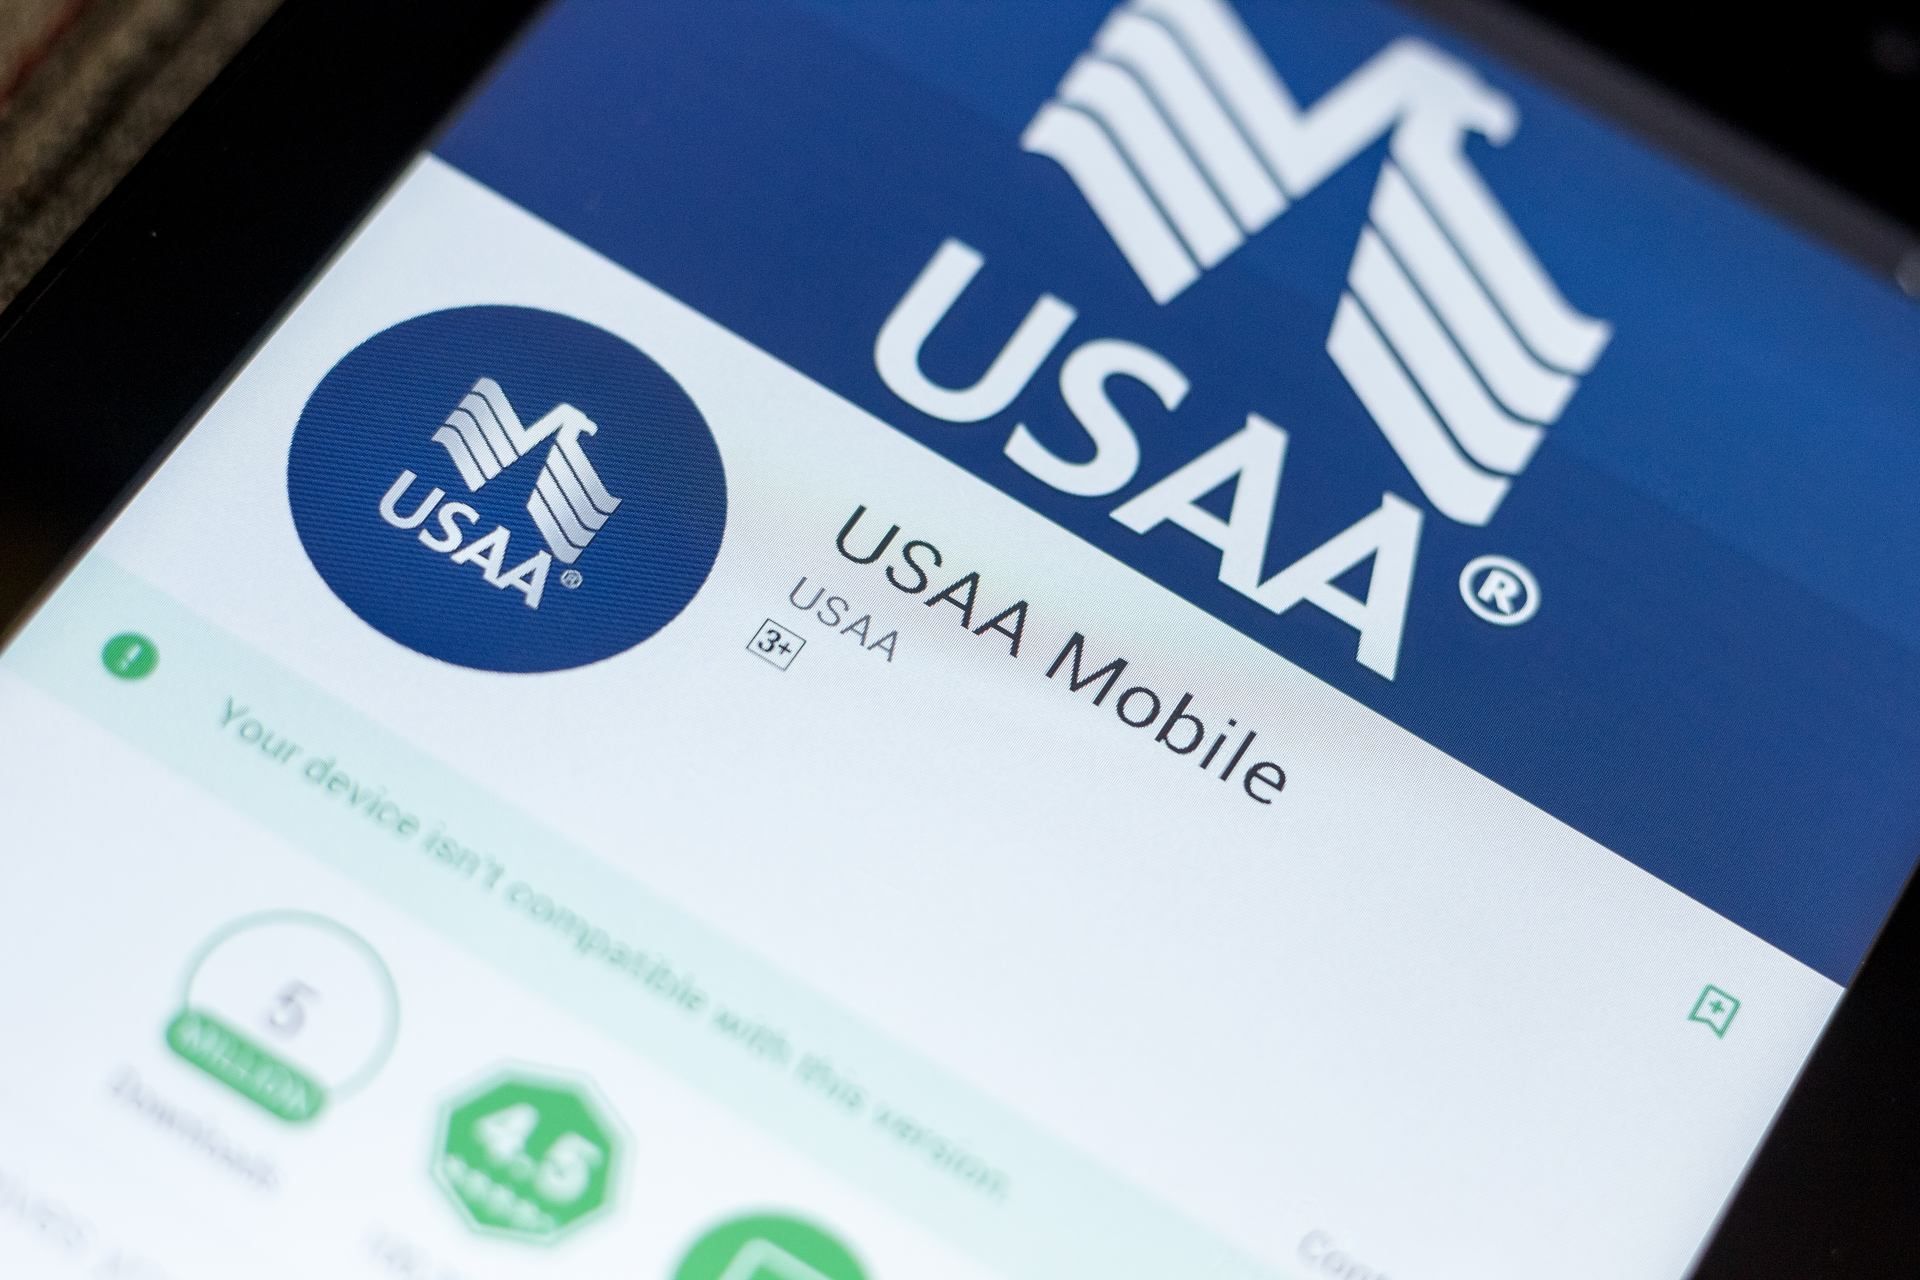 USAA ShortChanged Customers With Totaled Cars, Class Action Lawsuit